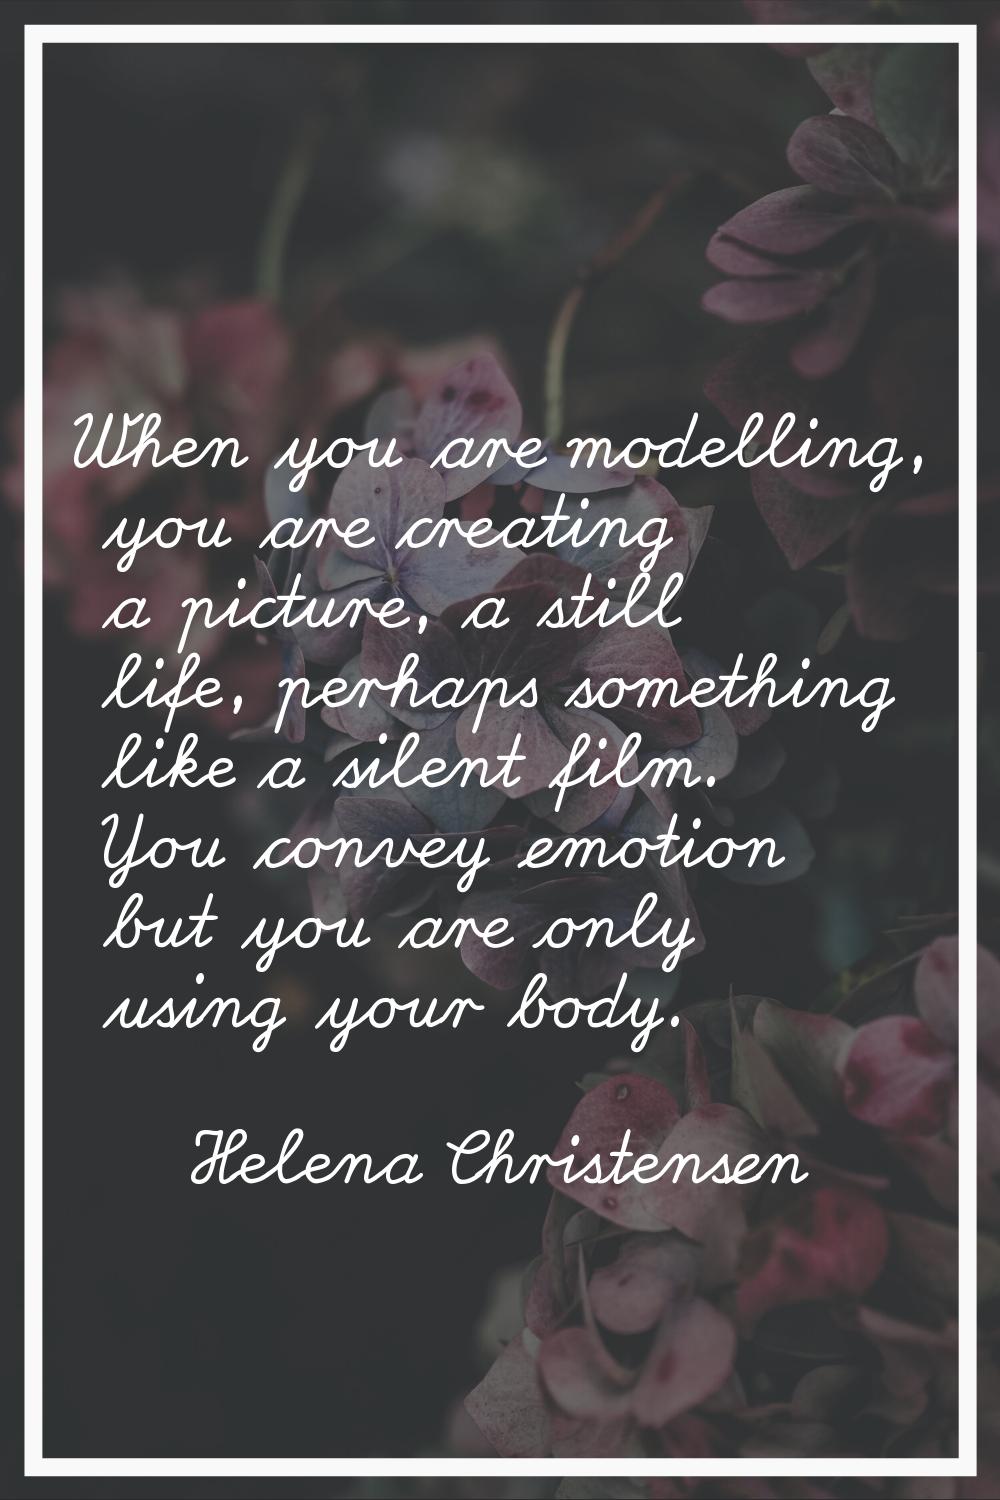 When you are modelling, you are creating a picture, a still life, perhaps something like a silent f